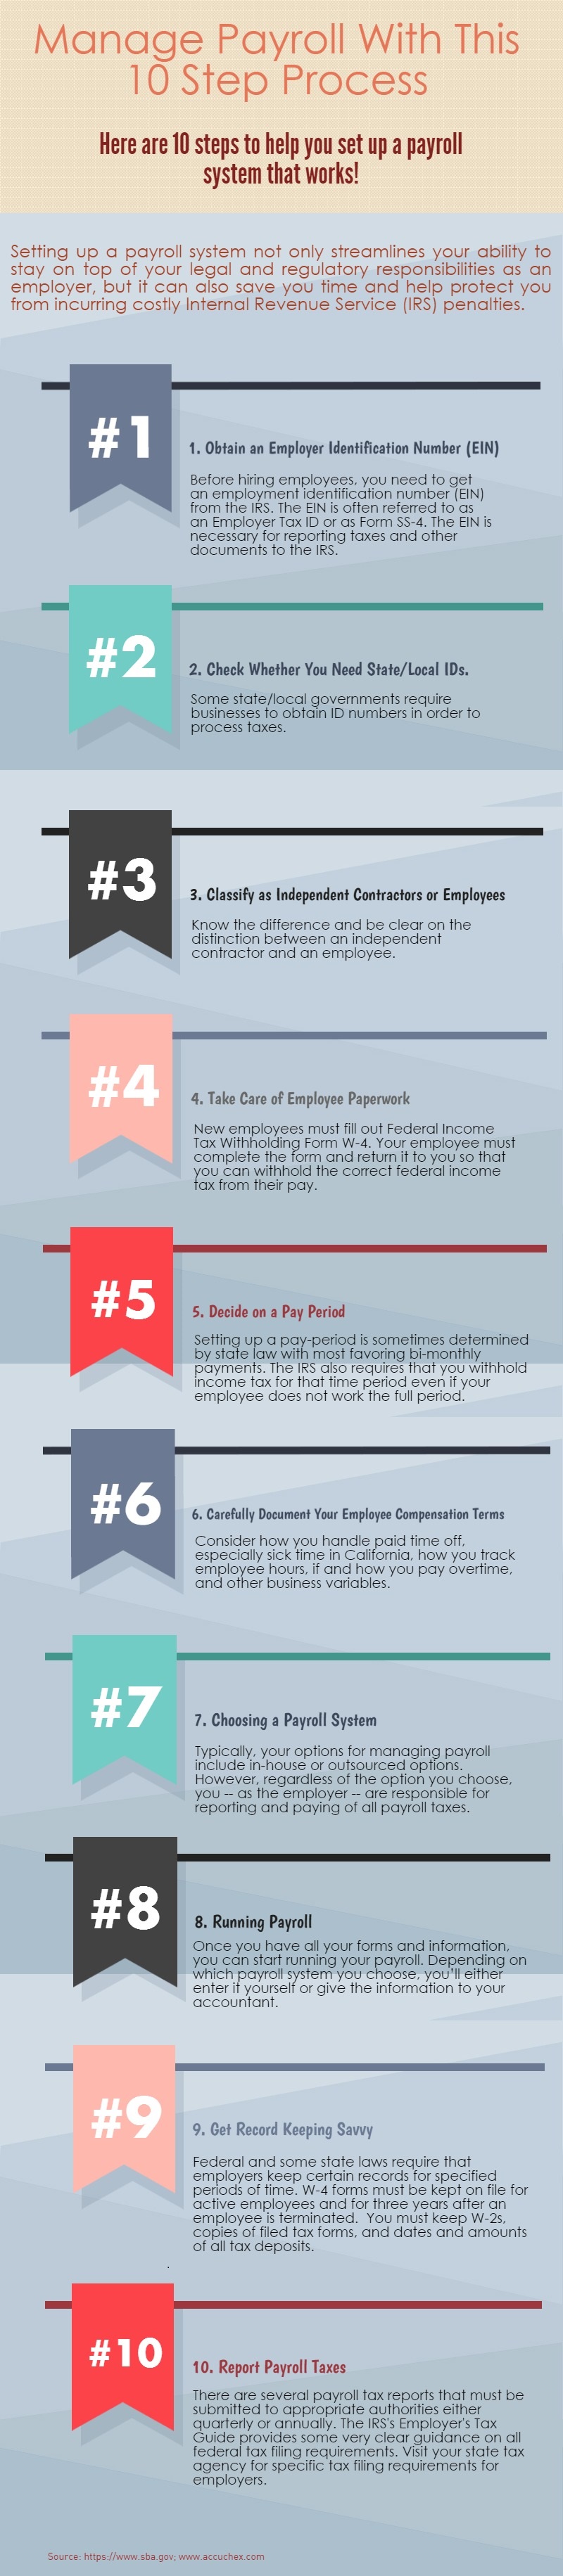 manage-payroll-with-this-10-step-process.jpg